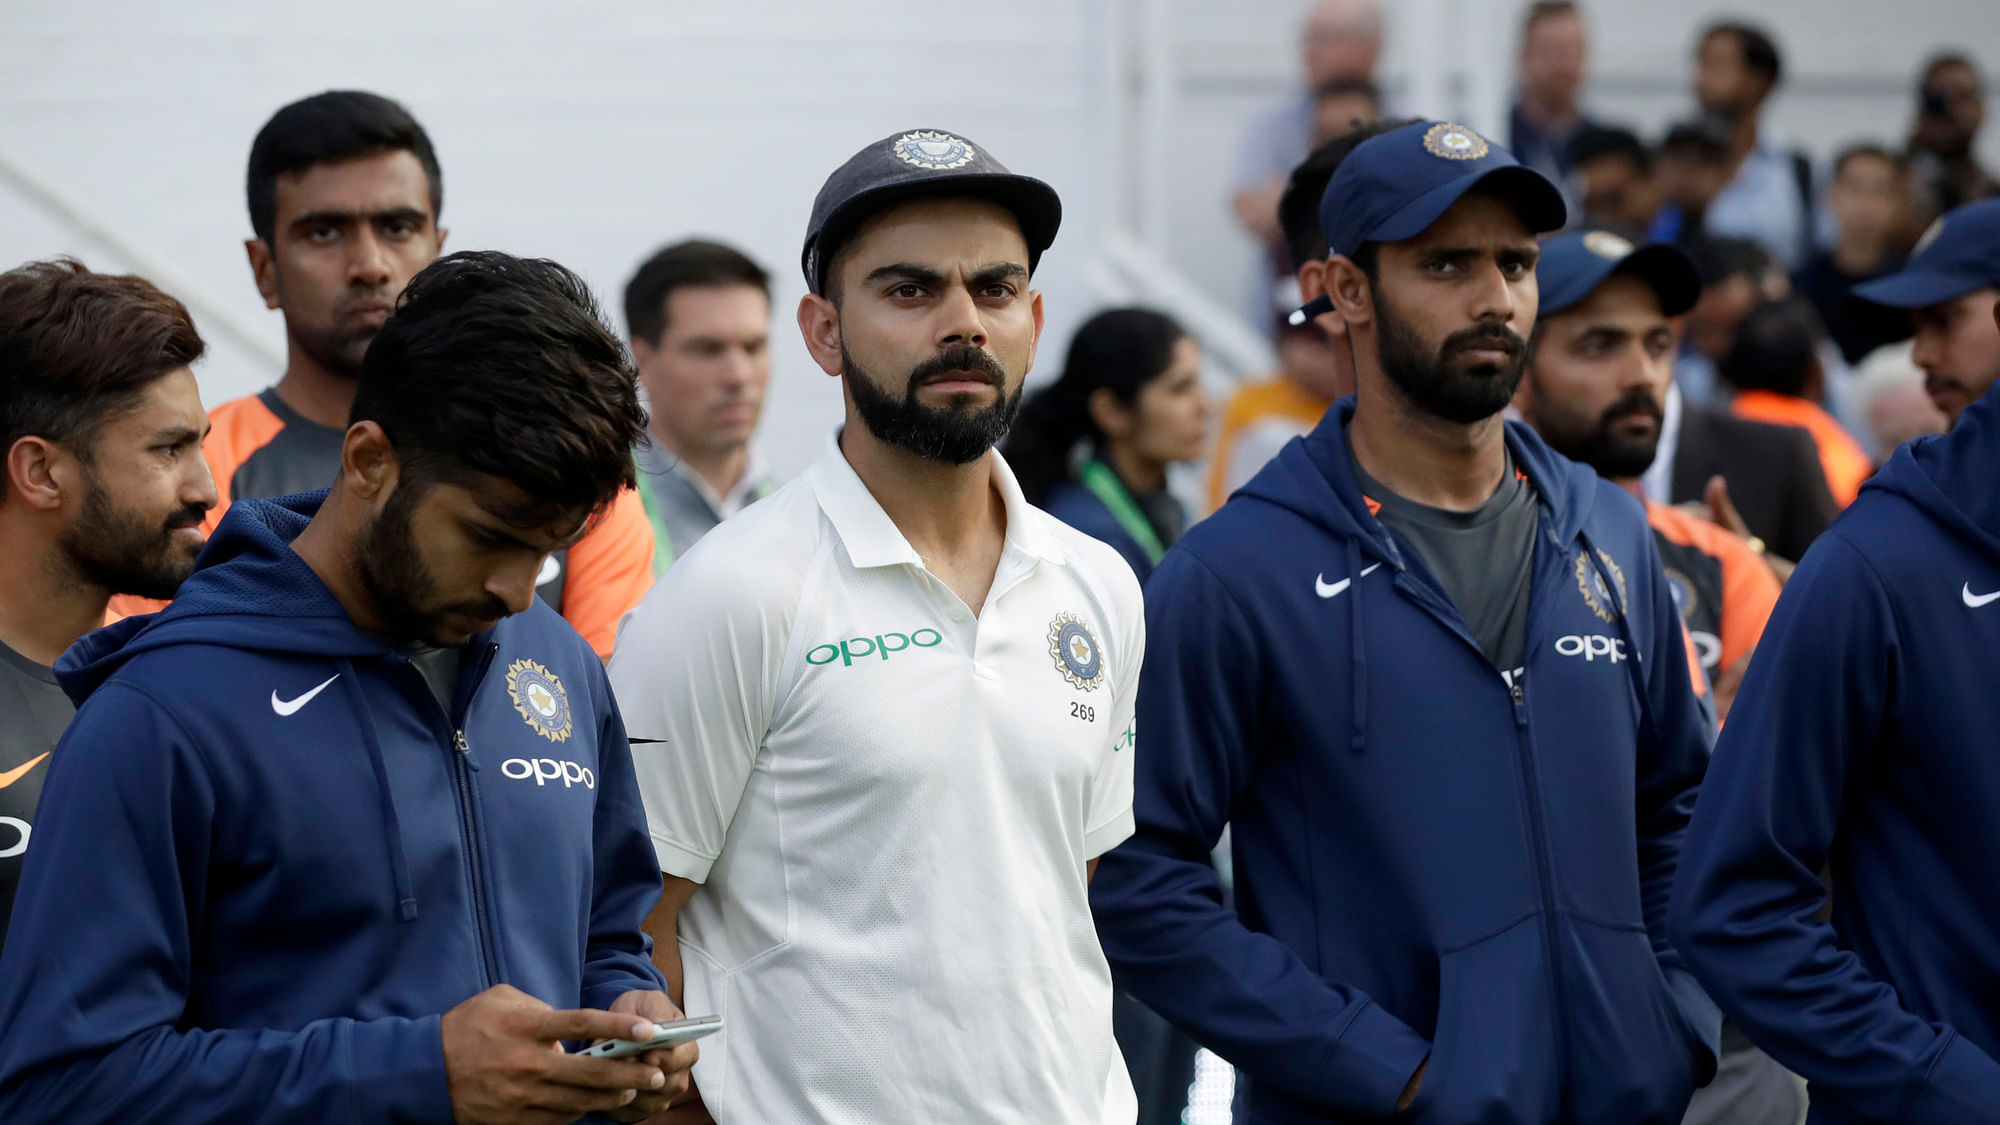 Indian skipper Virat Kohli said he believed his team were not outplayed by England in the Test series that they lost 4-1.